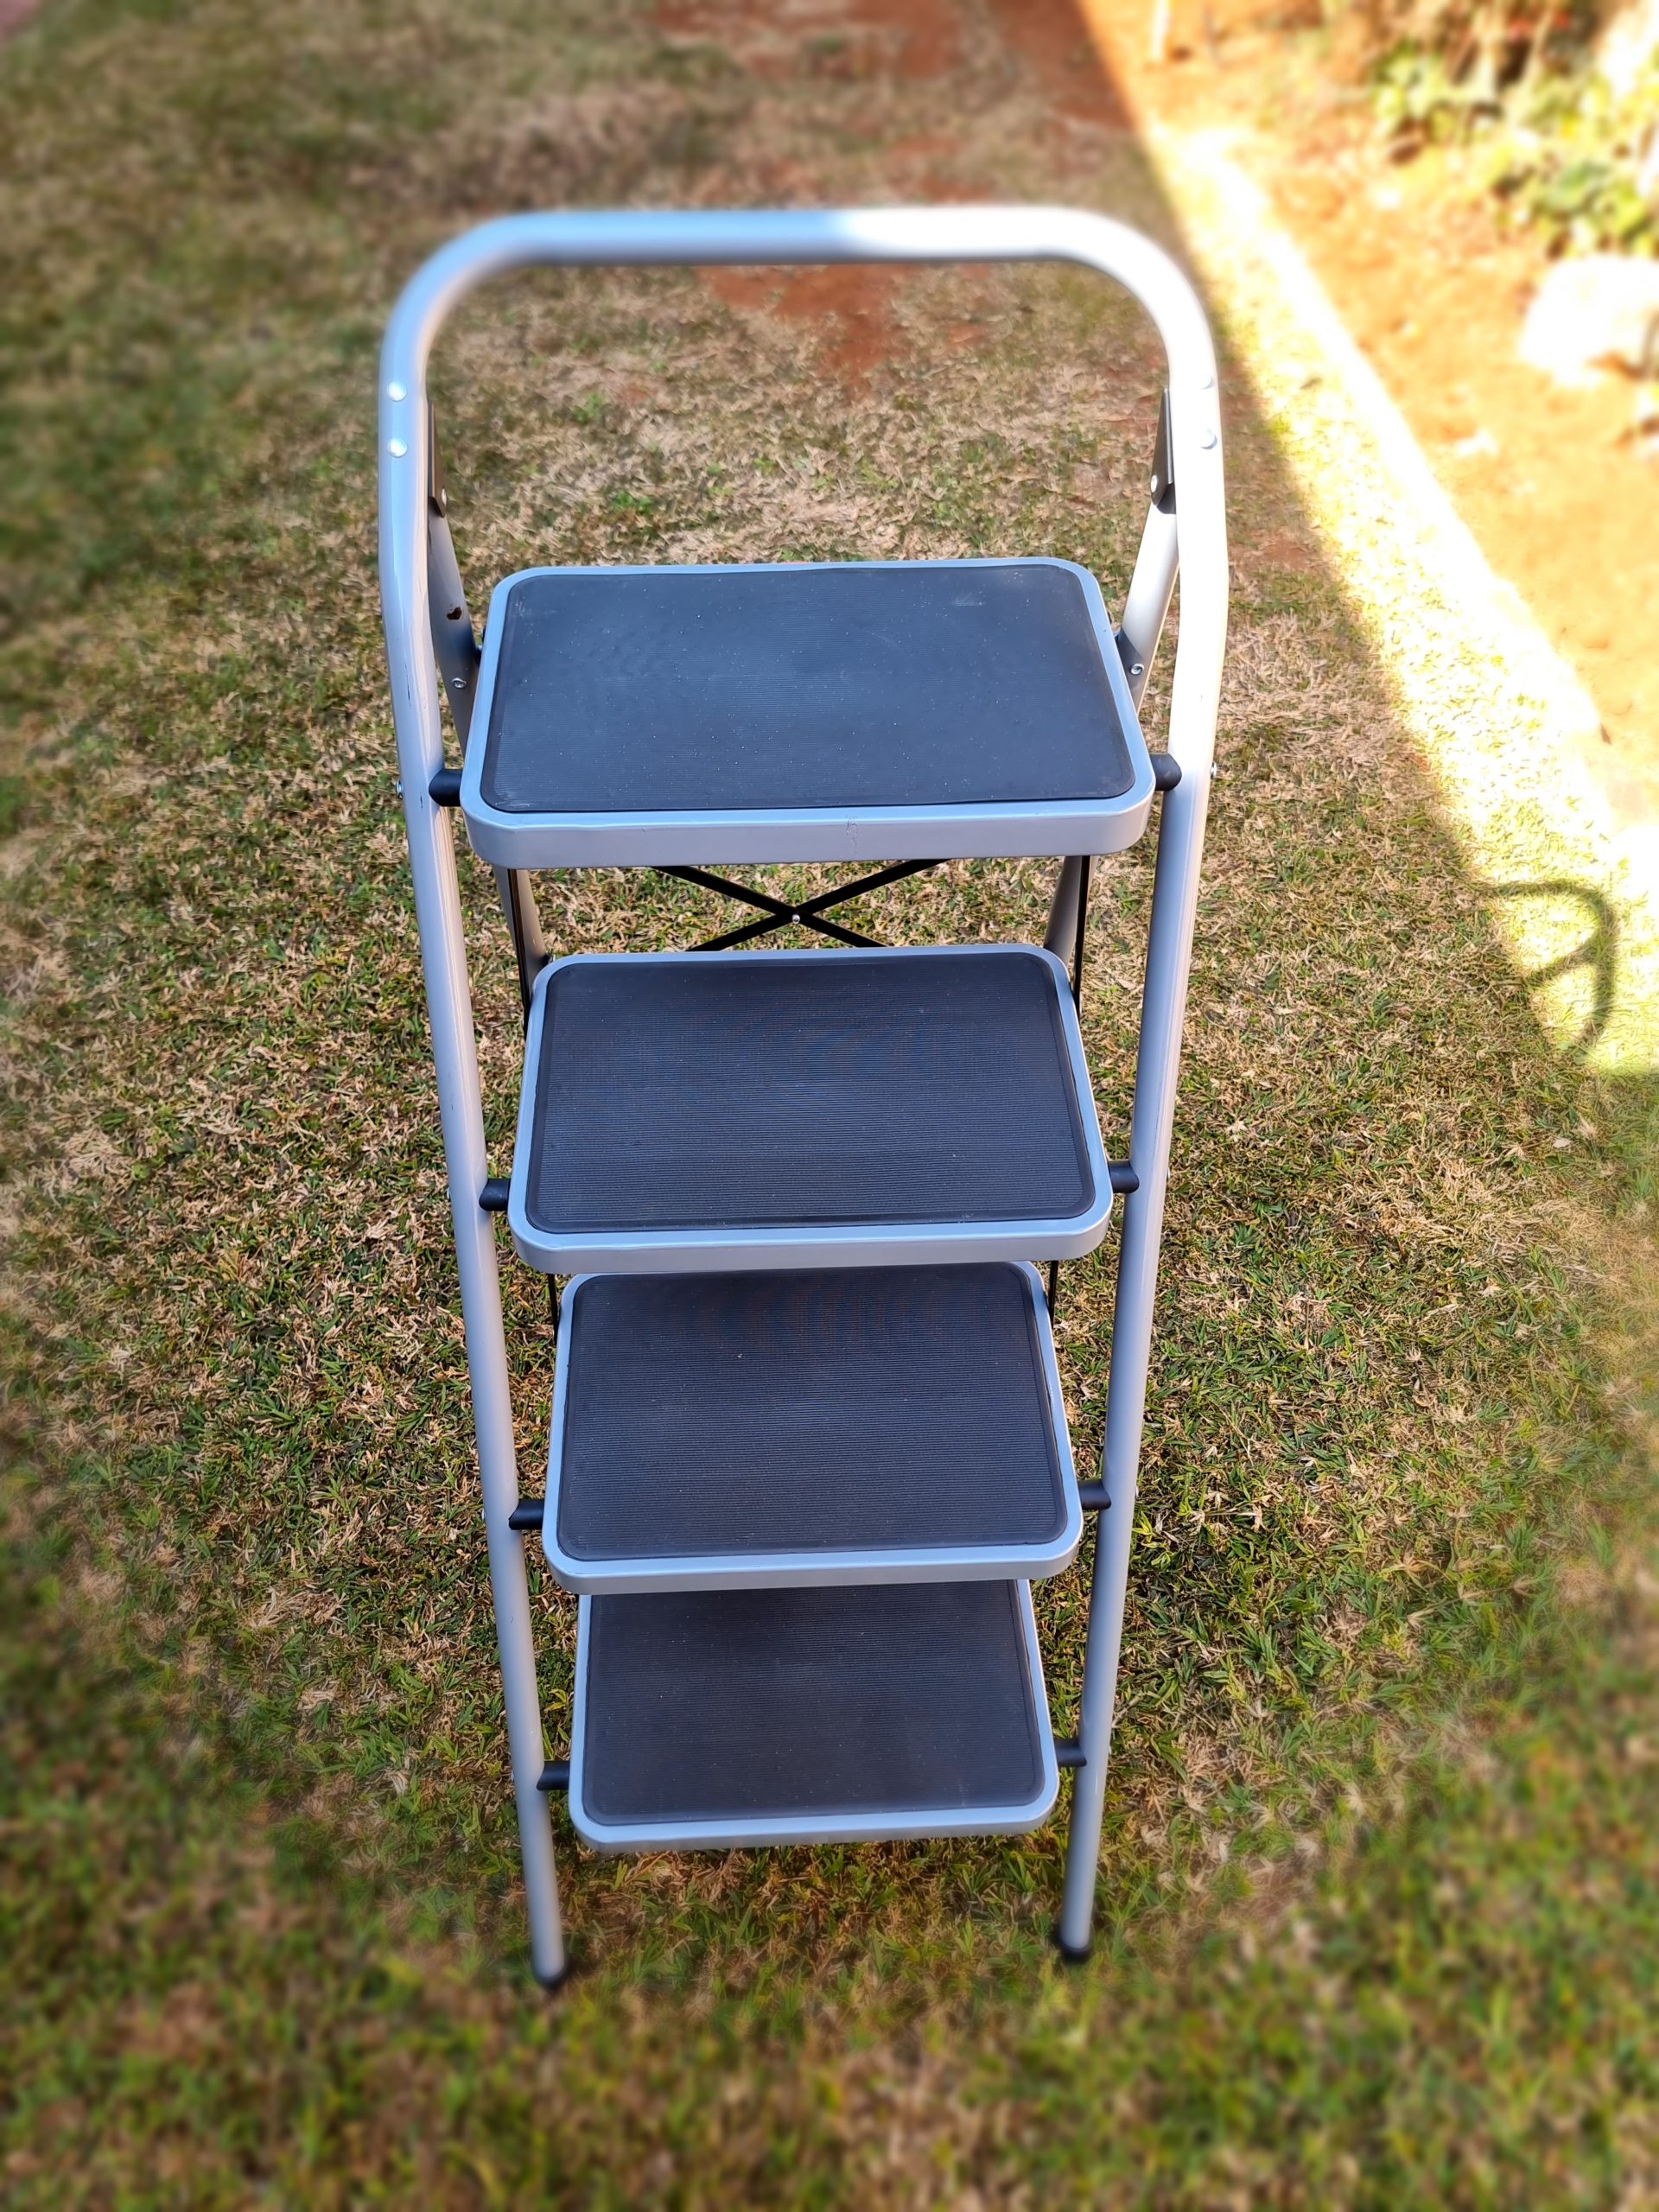 ITC 4-Step Ladder Step Stool – New, back cross pop rivet lose – perfect working condition